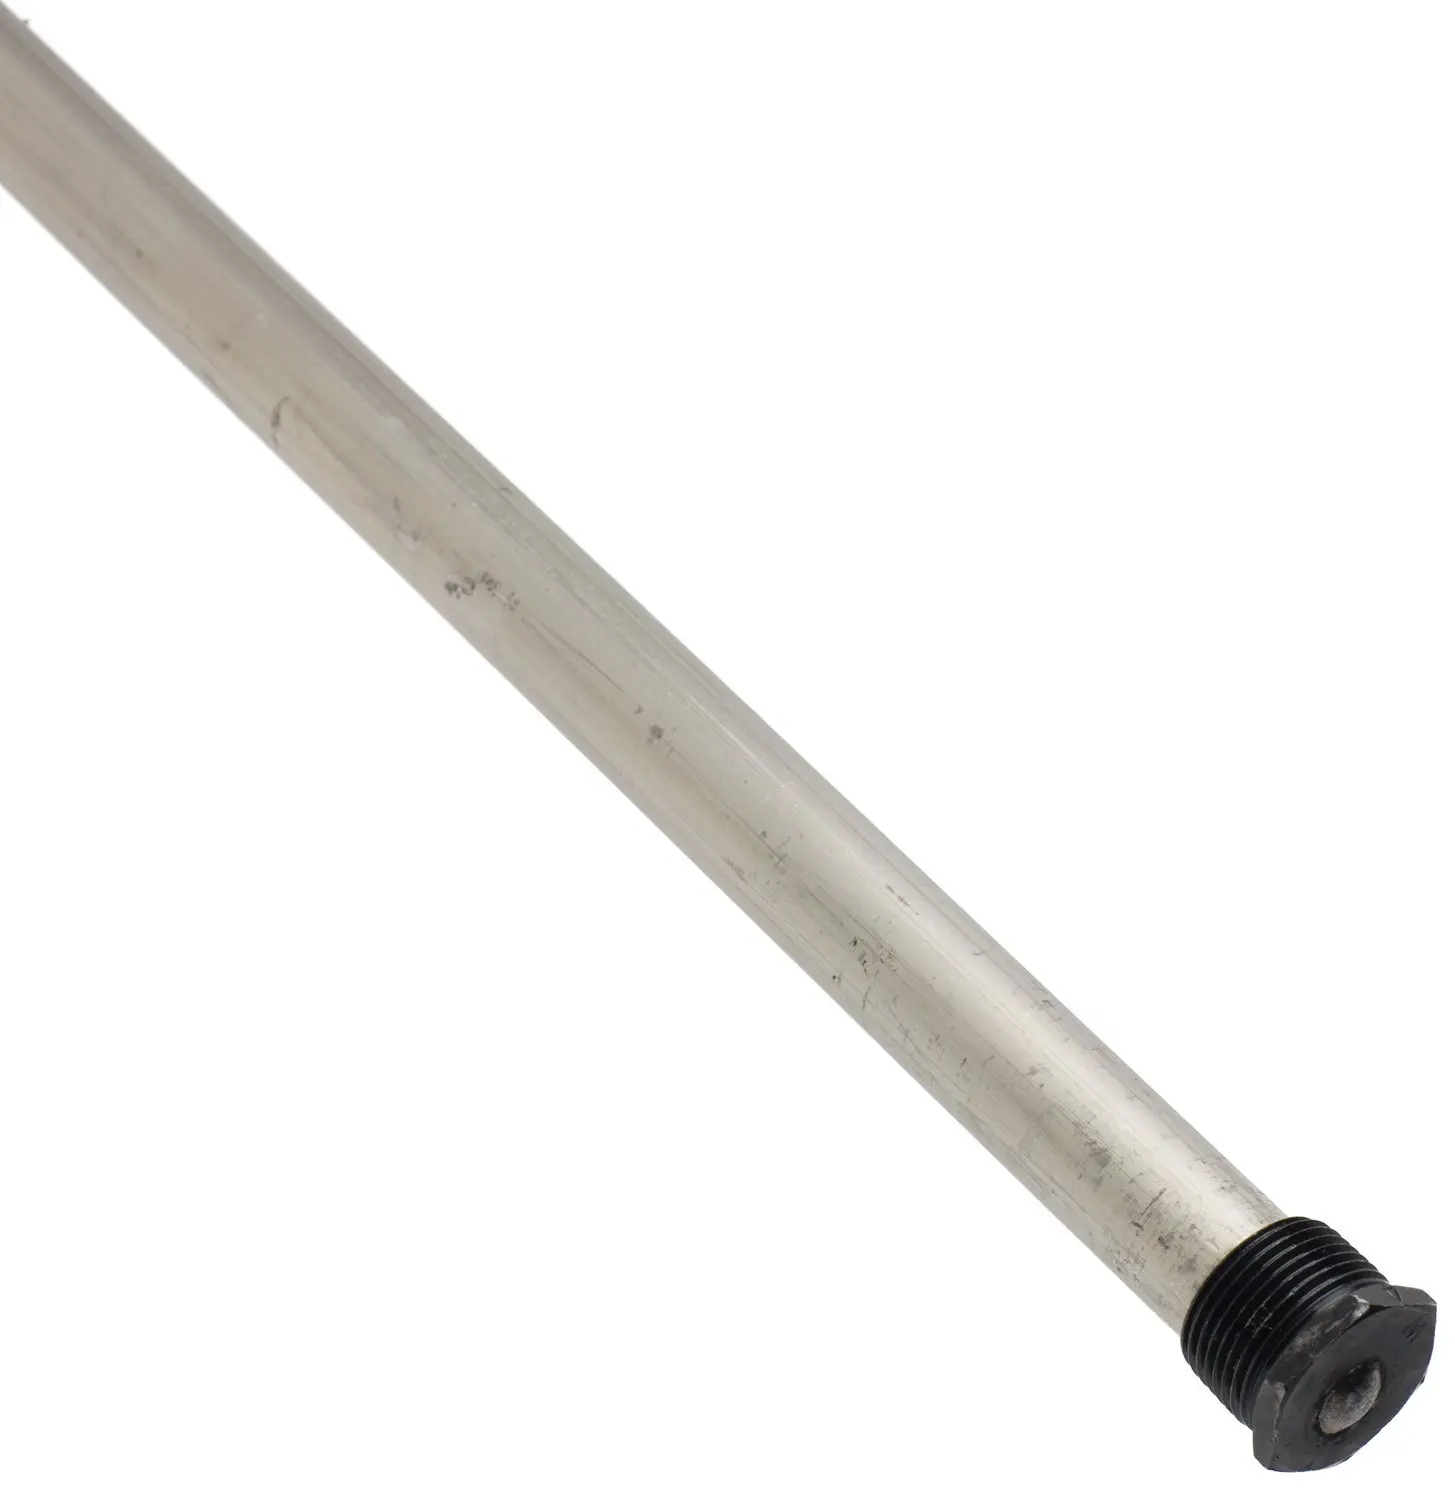 Direct factory price extruded magnesium rod anode for water heater (1600210525036)